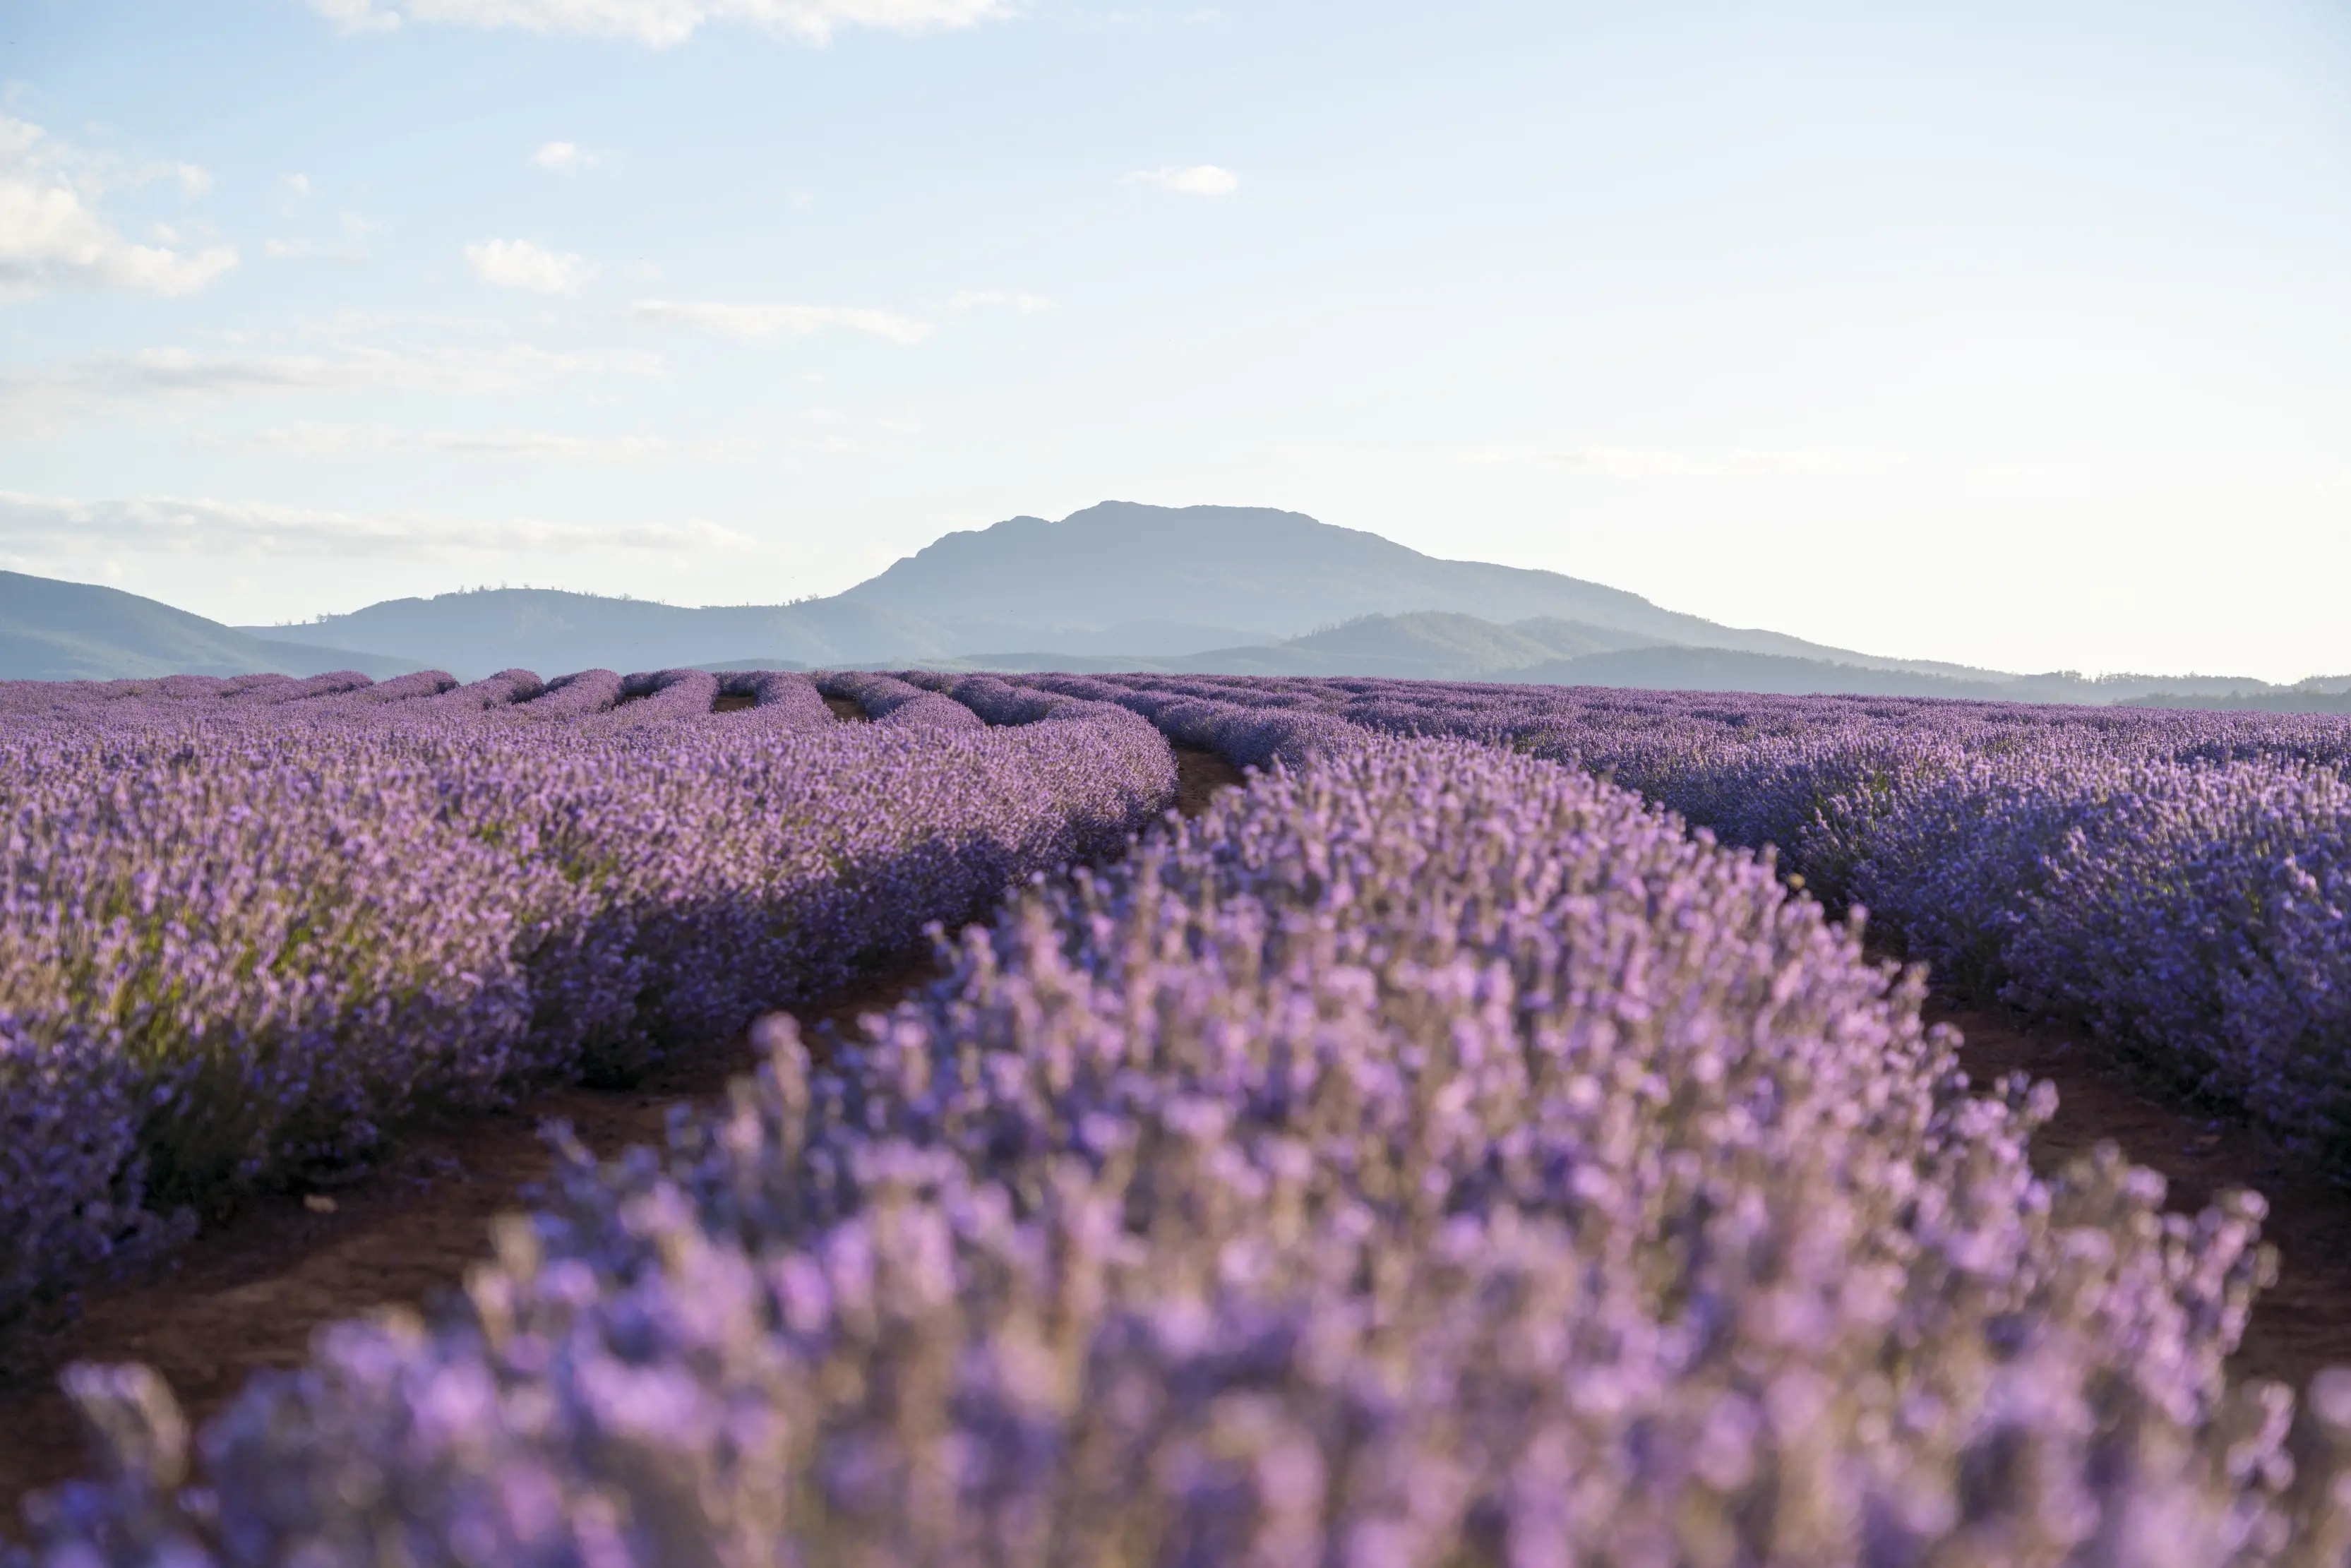 Lavender growing with mountains in the background at Bridestowe Lavender Estate, Nabowla.